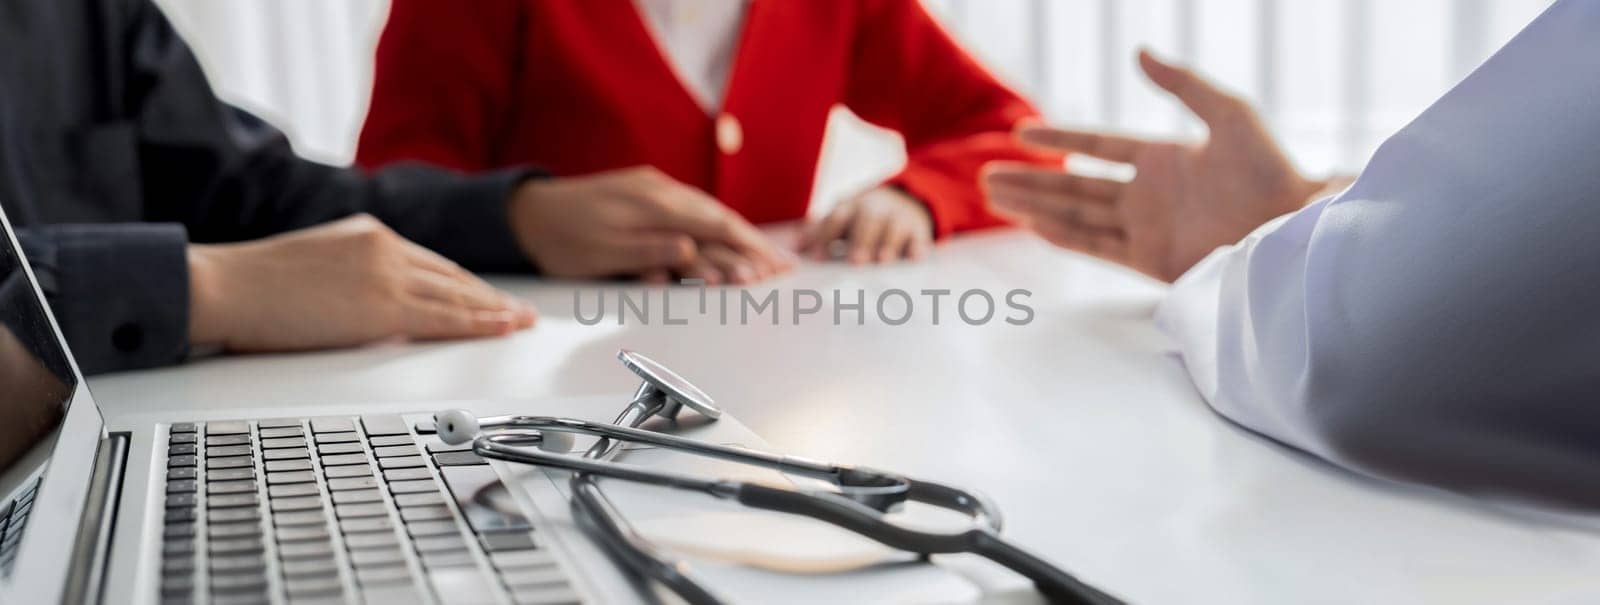 Couple attend fertility or medical consultation with gynecologist at hospital as family planning care for pregnancy. Husband and wife consoling each other through doctor appointment. Panorama Rigid